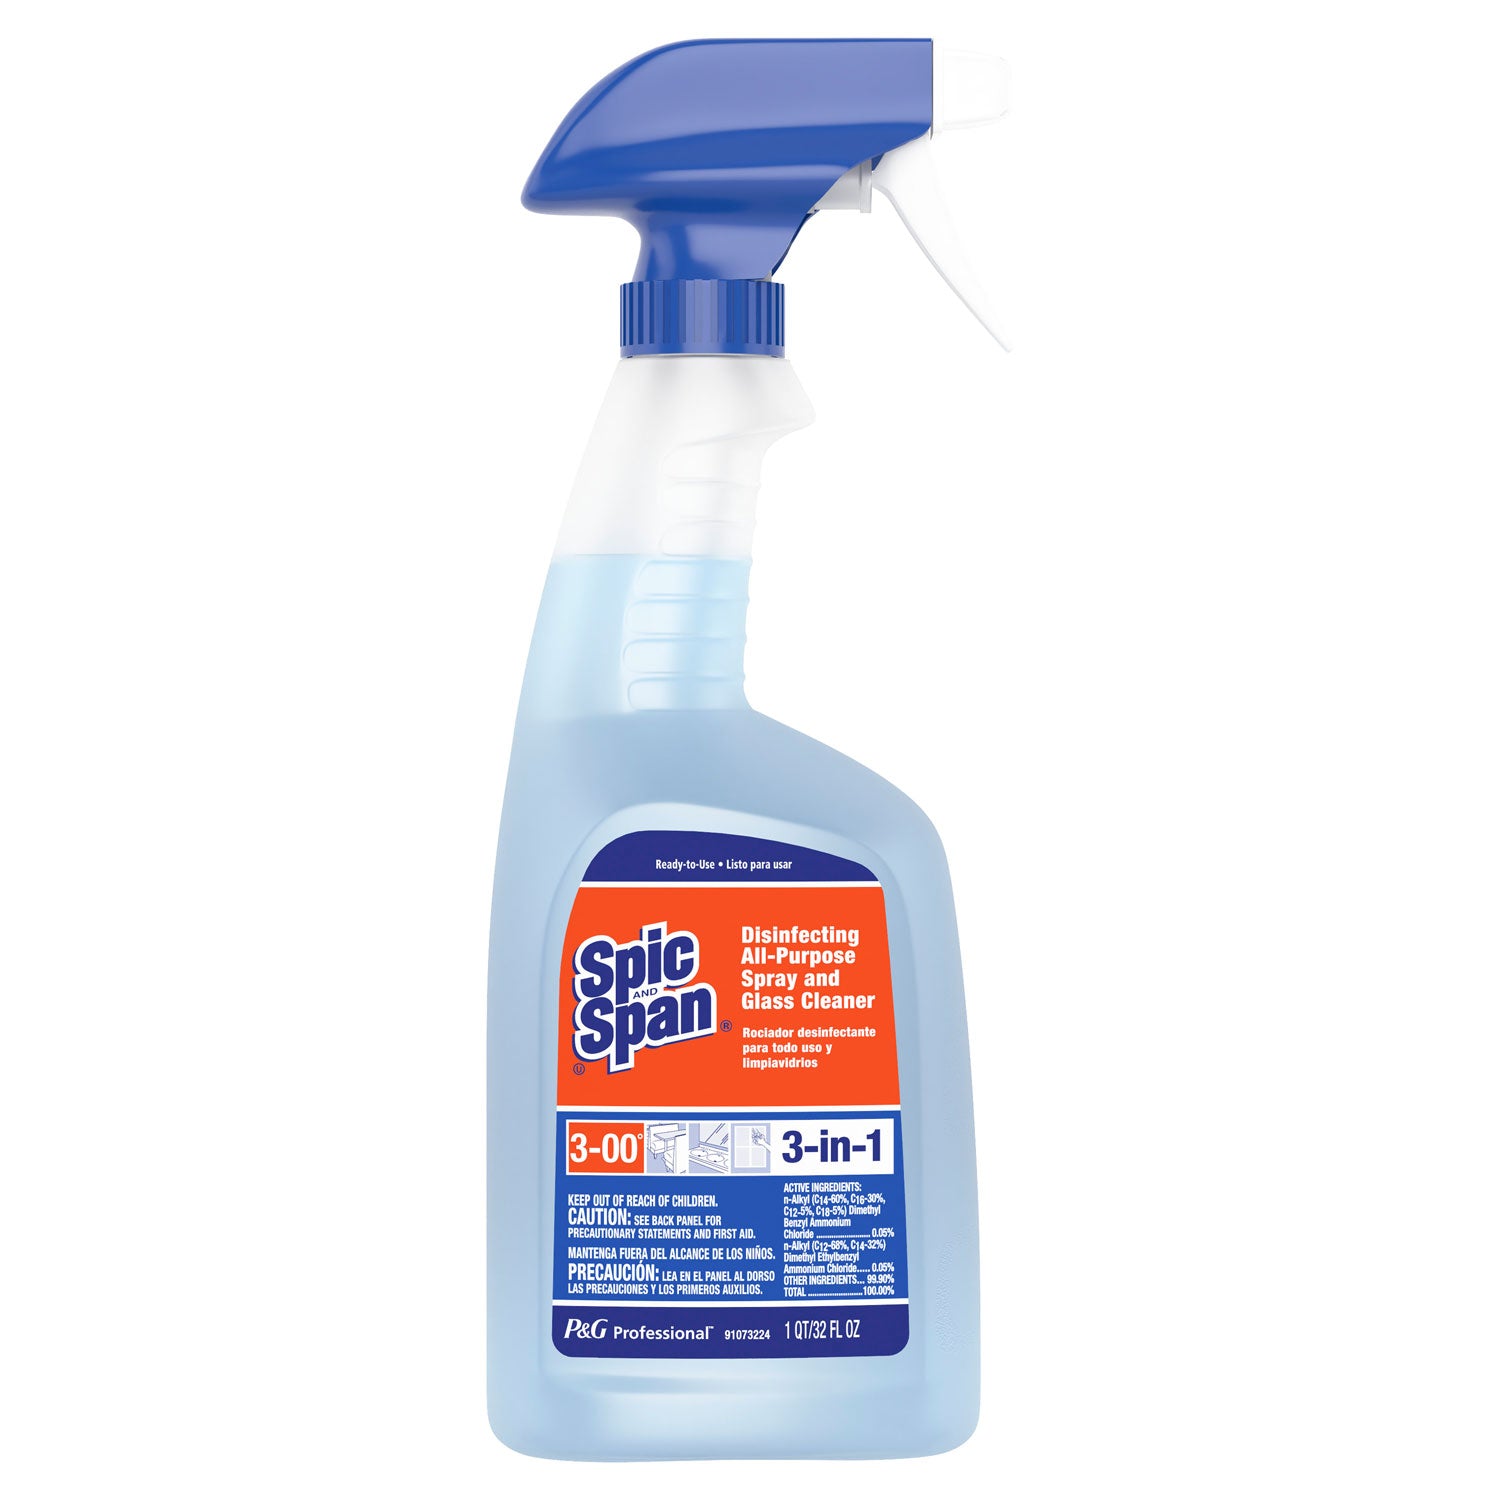 PROCTER & GAMBLE Disinfecting All-Purpose Spray and Glass Cleaner, Fresh Scent, 32 oz Spray Bottle, 8/Carton